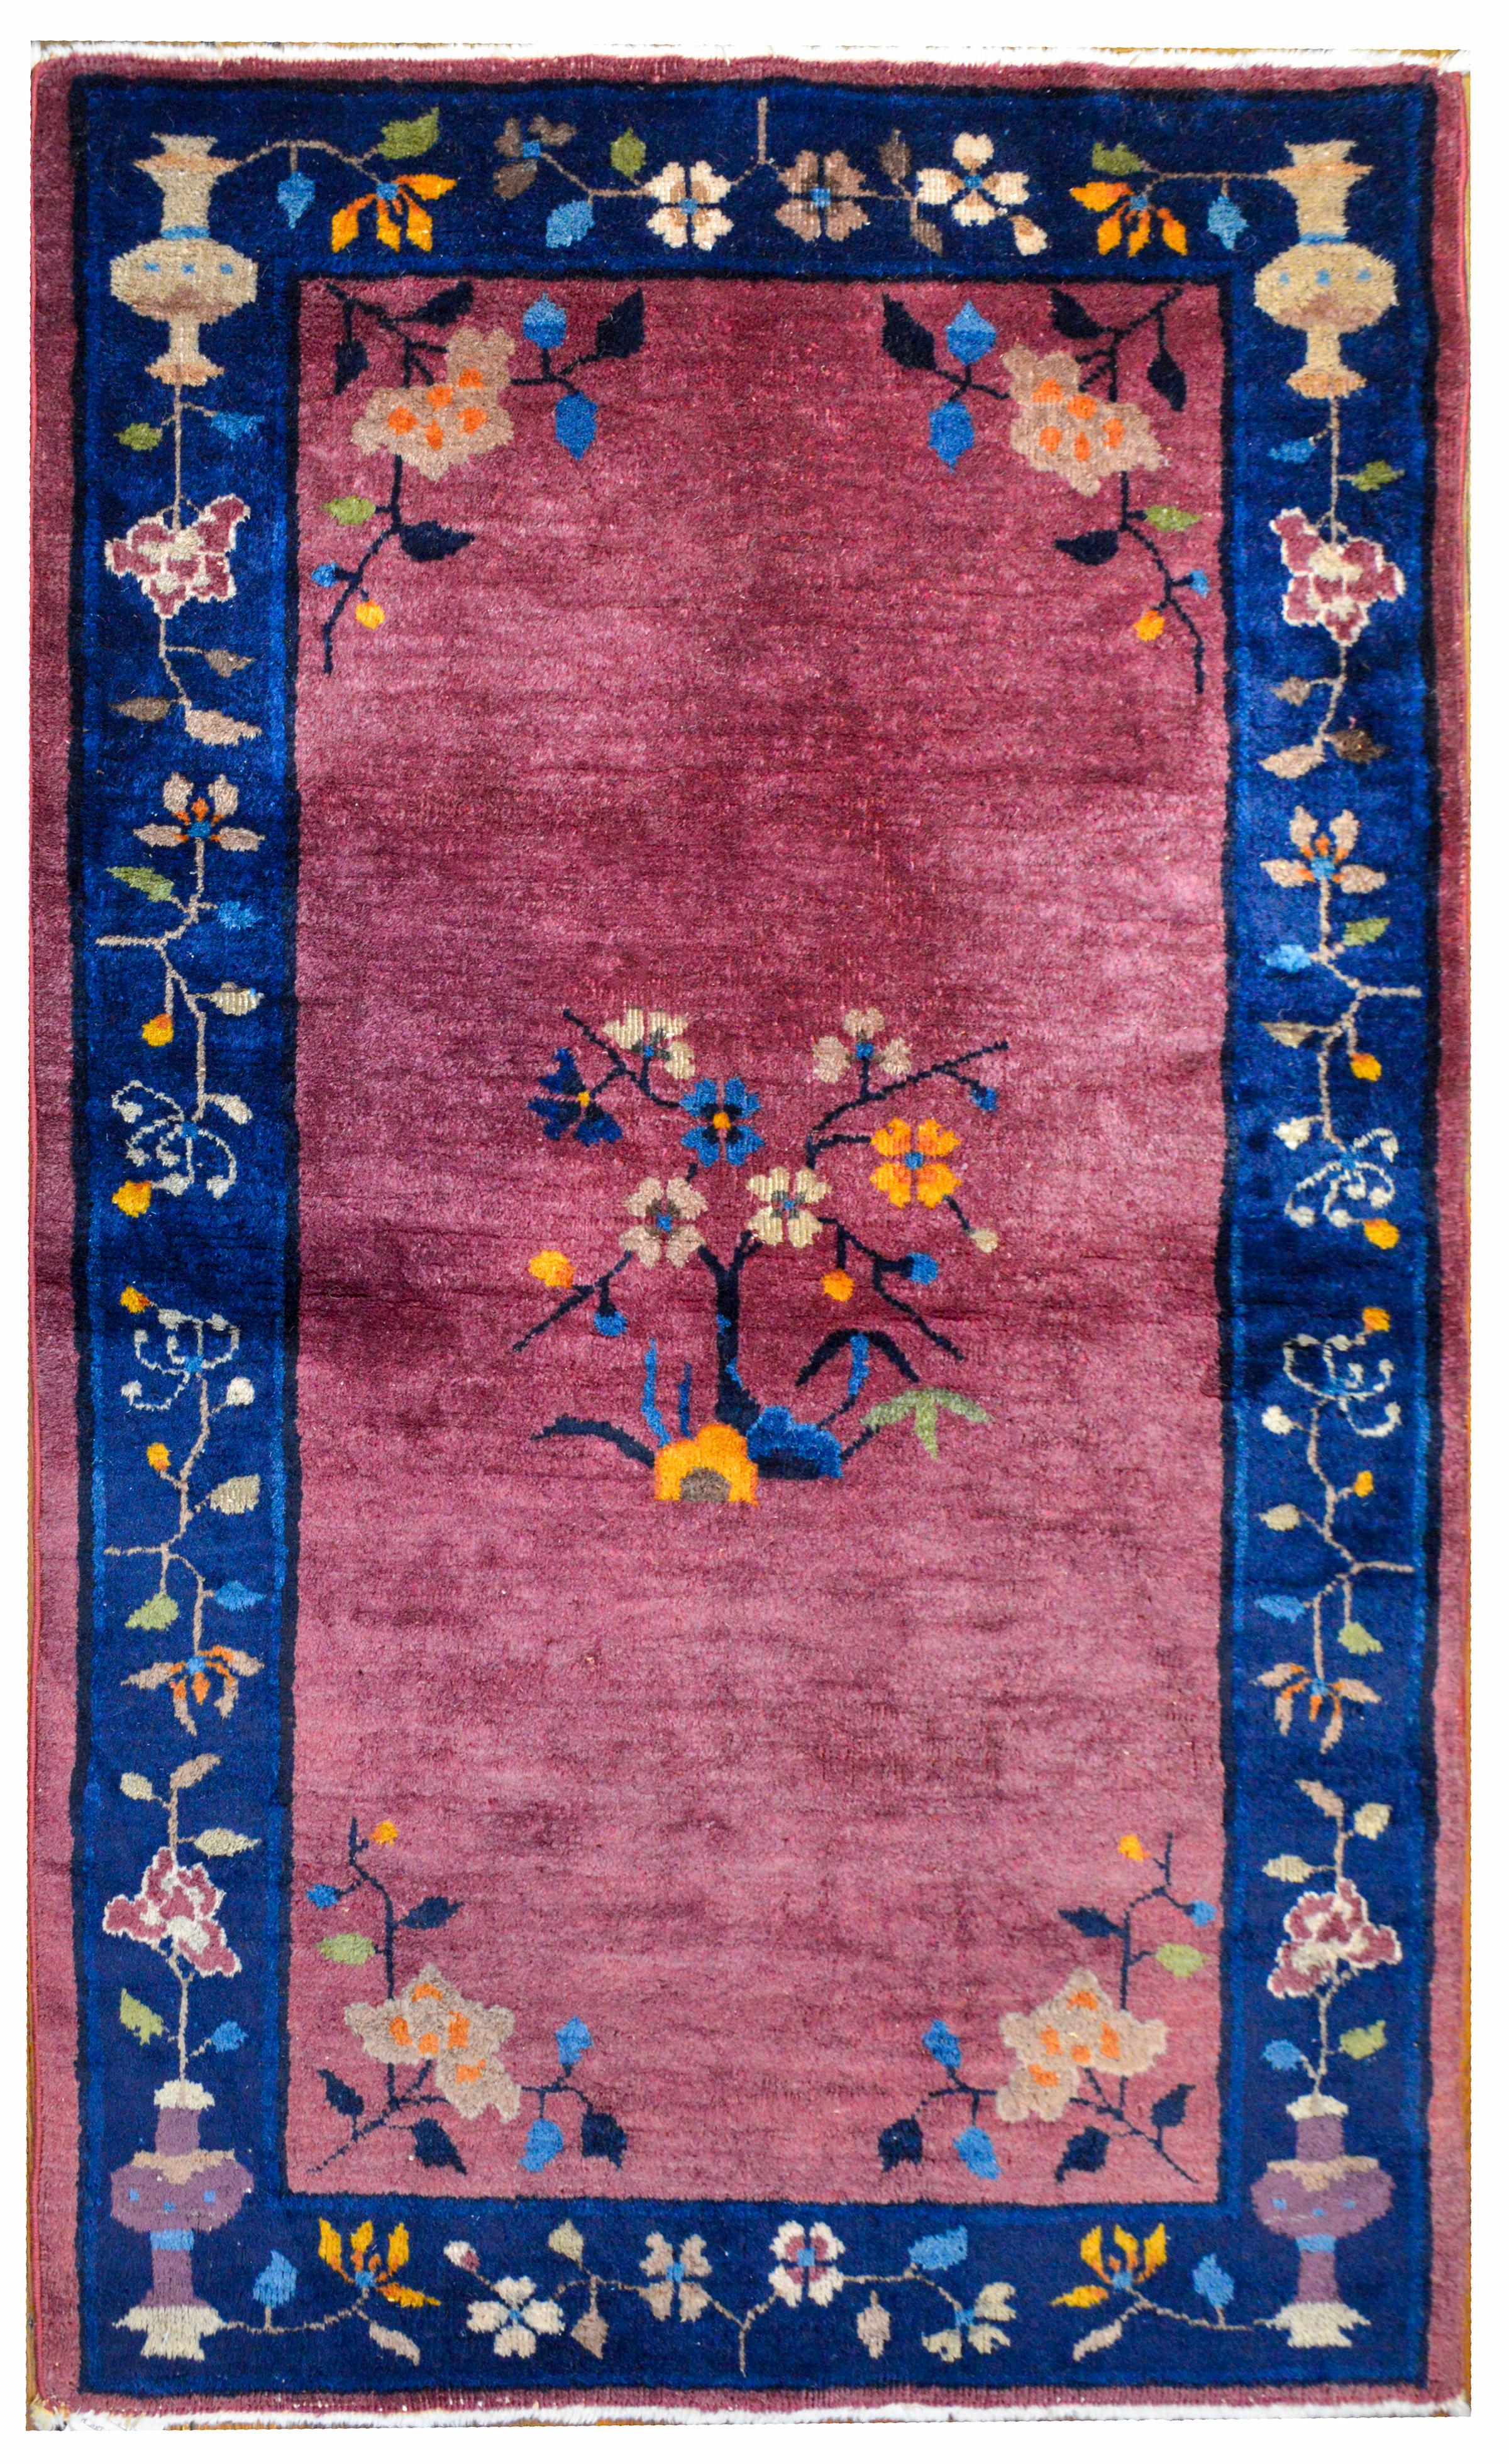 A beautiful early 20th century Chinese Art Deco rug with a rich lavender field surrounded by a wide indigo stripe border. The field features a blossoming cherry blossom tree in the center with a peony in each corner, surrounded by a cherry blossom